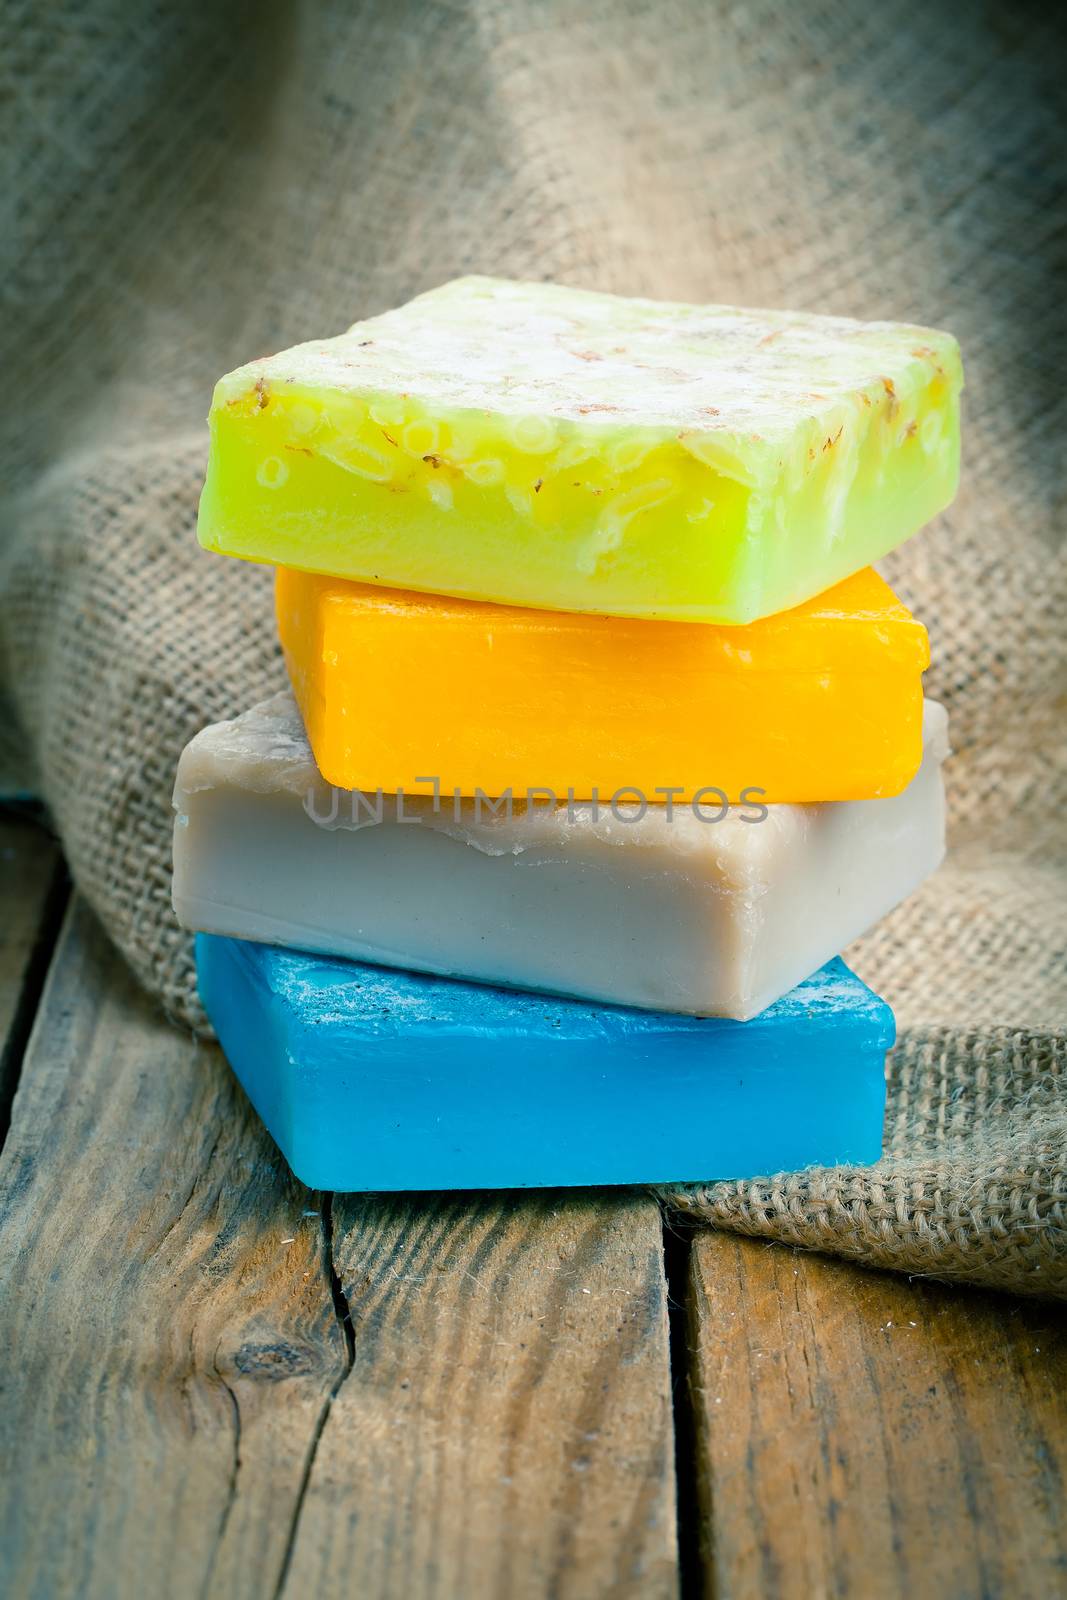 colorful handmade soap bars, on wooden background by motorolka